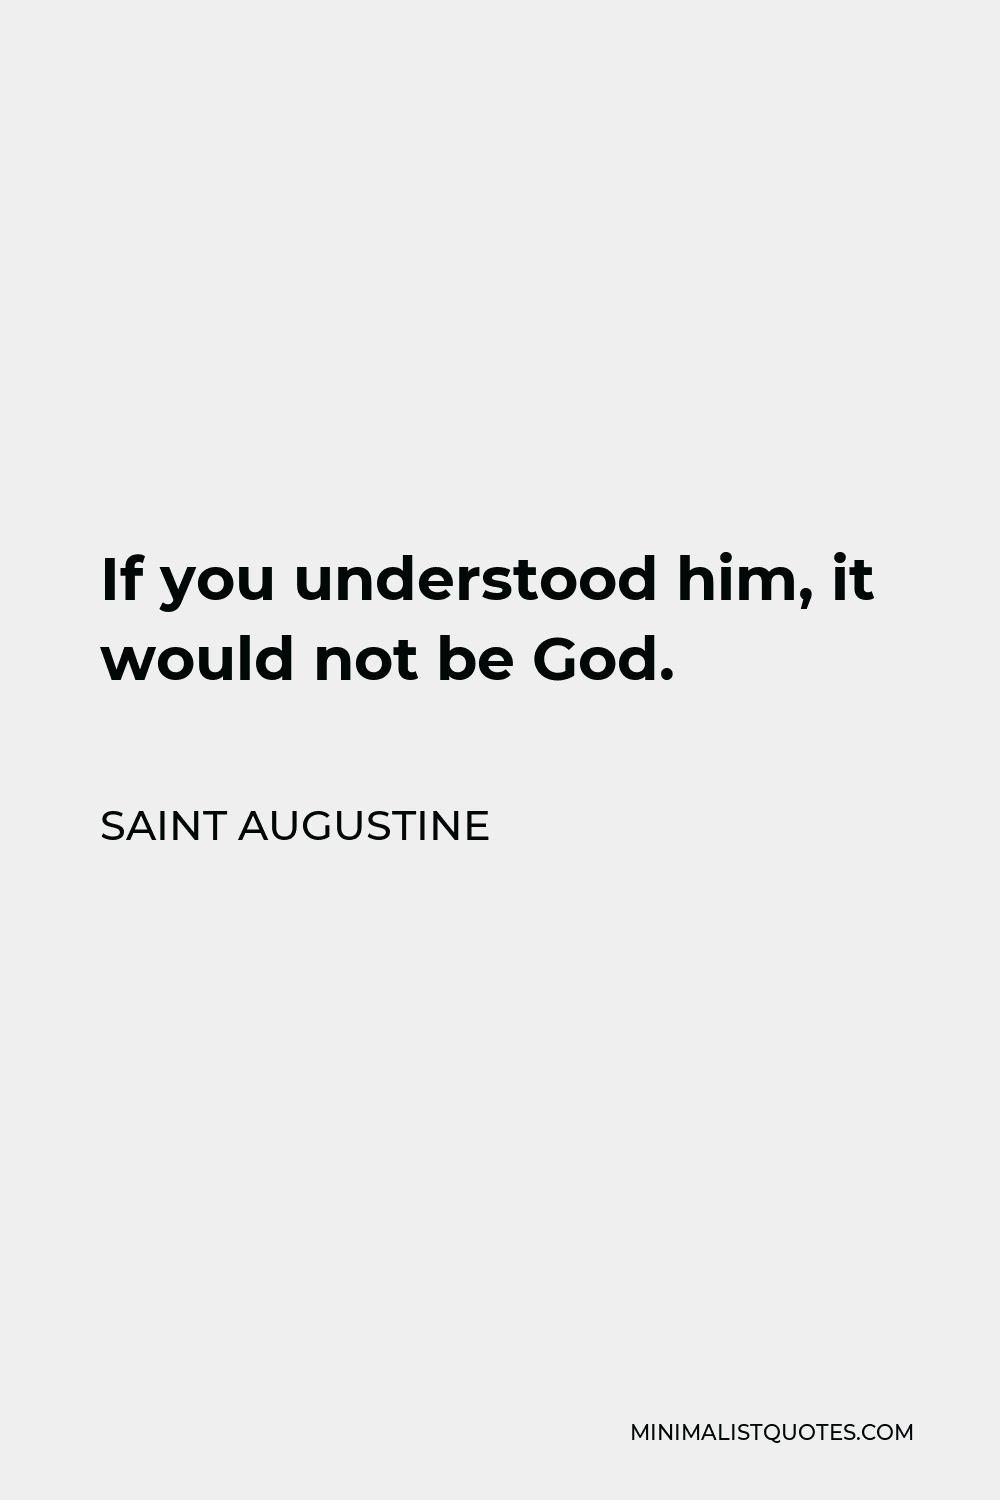 Saint Augustine Quote - If you understood him, it would not be God.